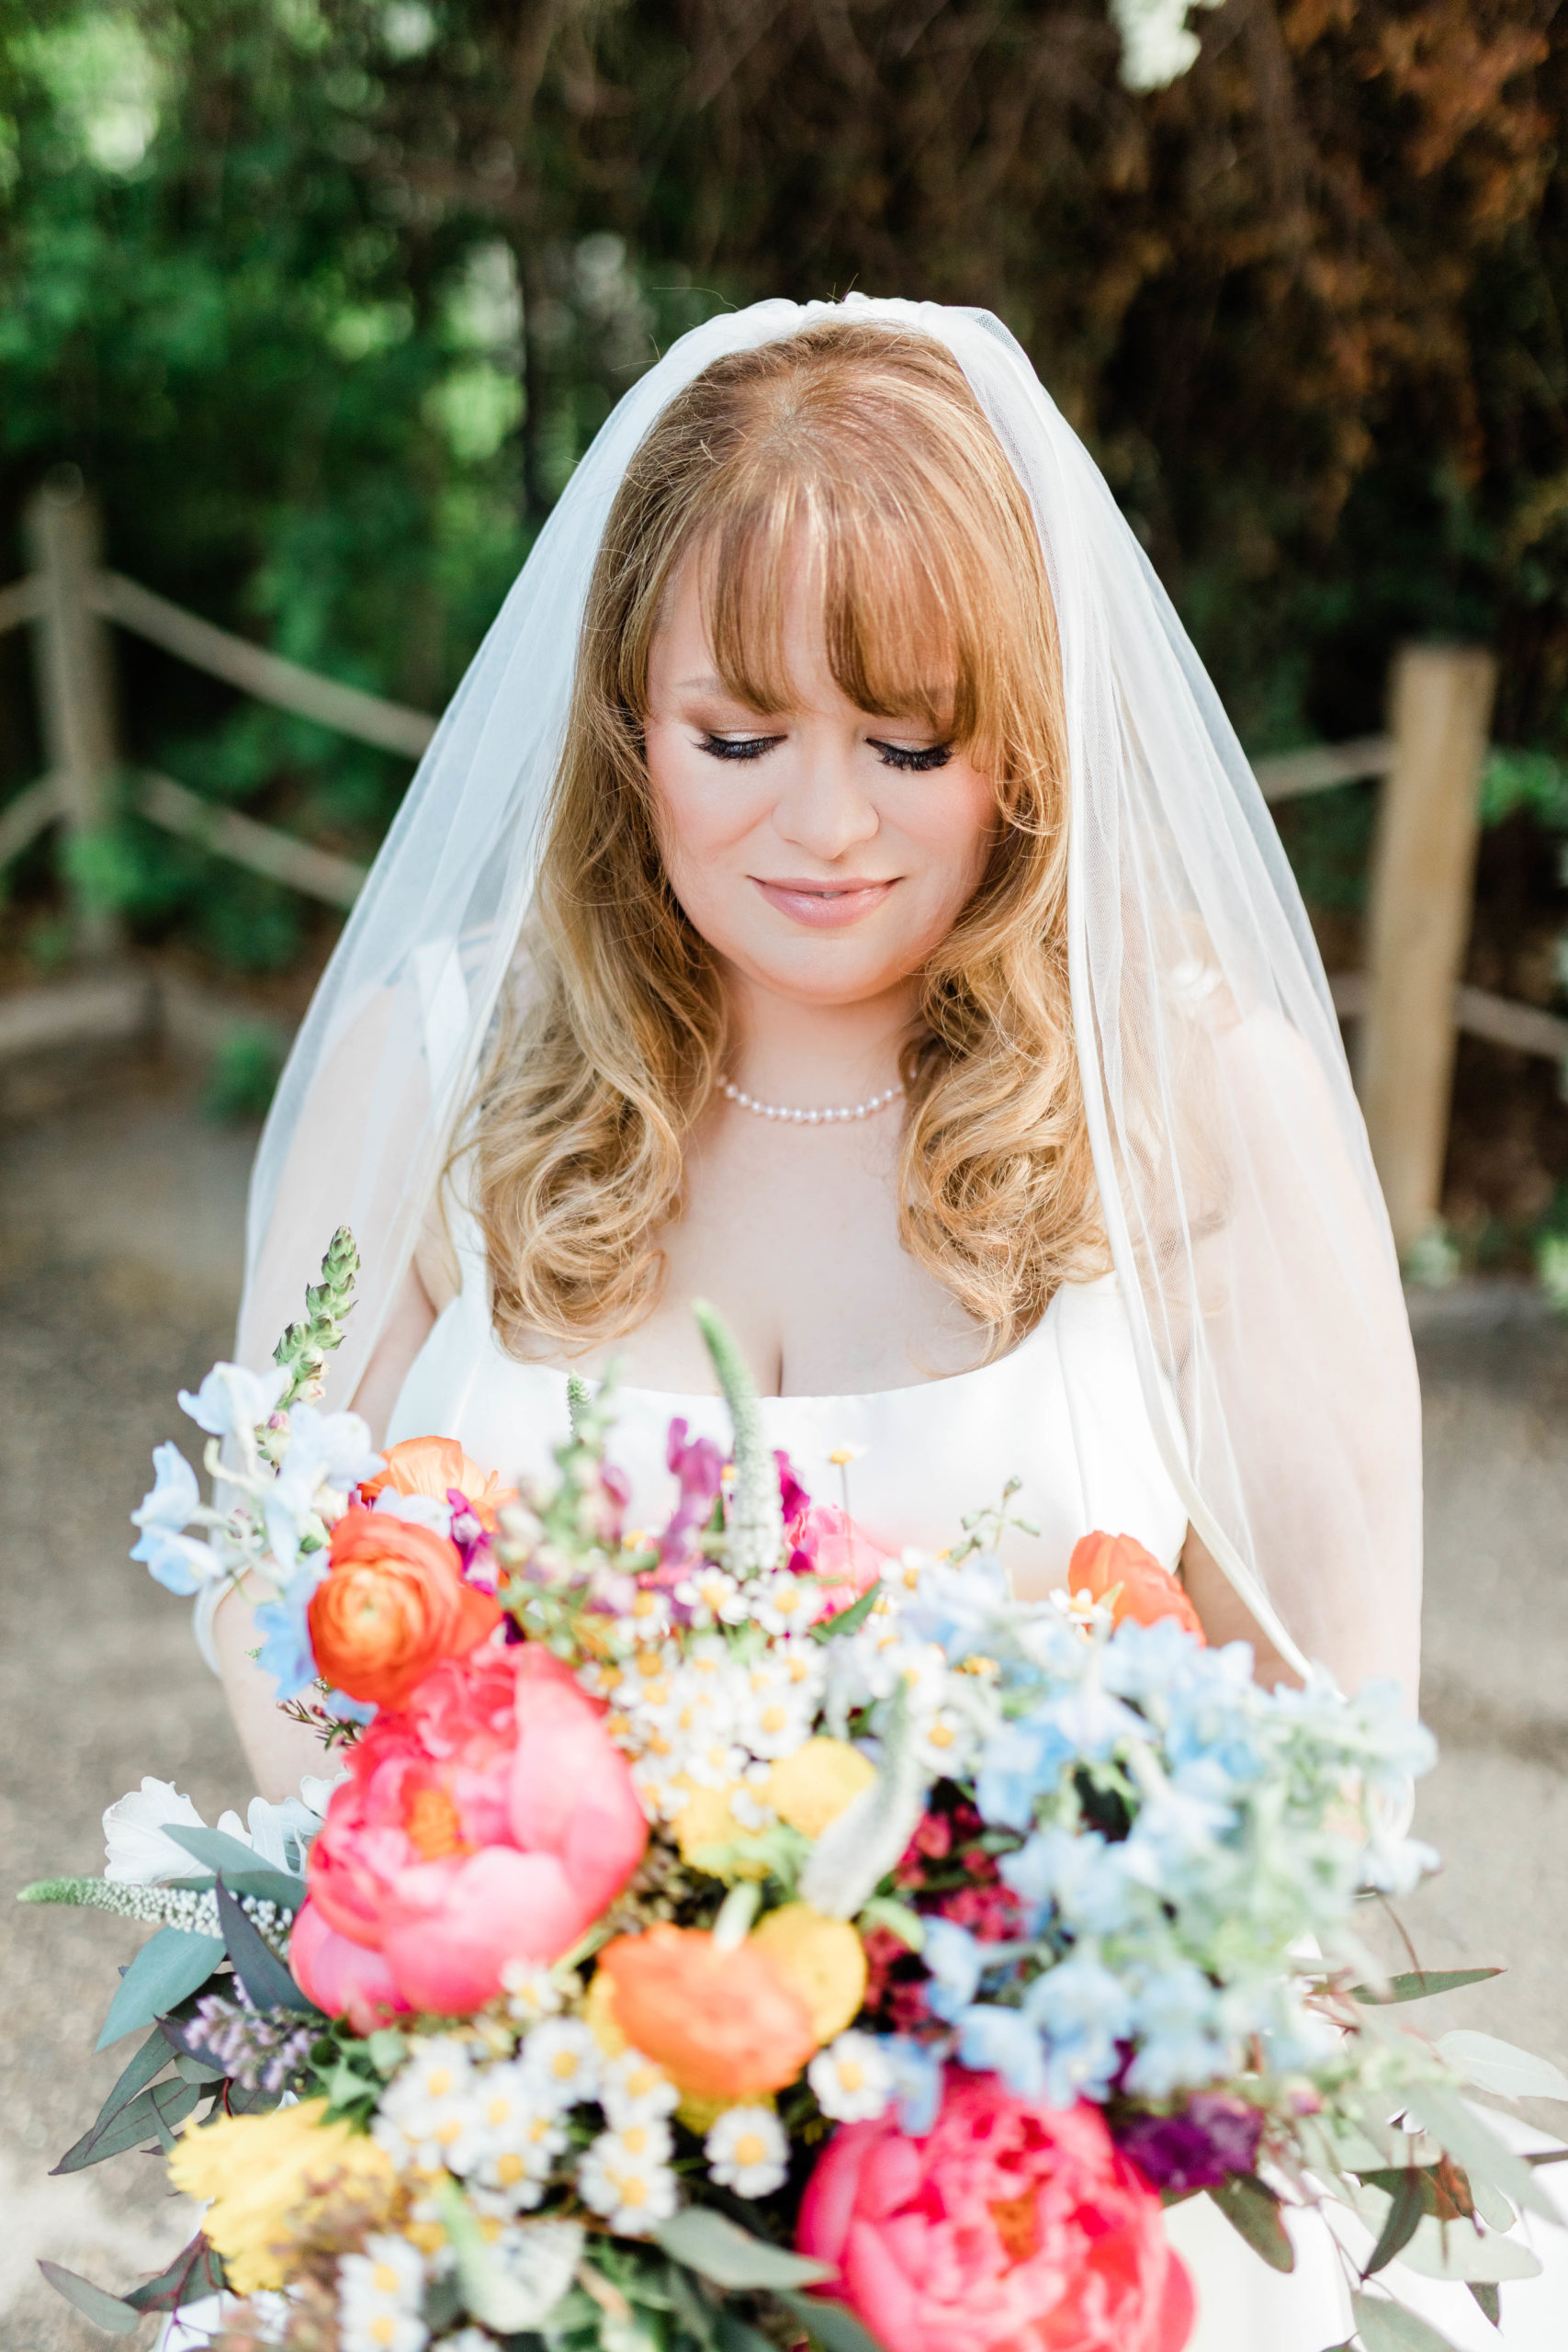 bride wearing veil and looking at colorful bridal bouquet